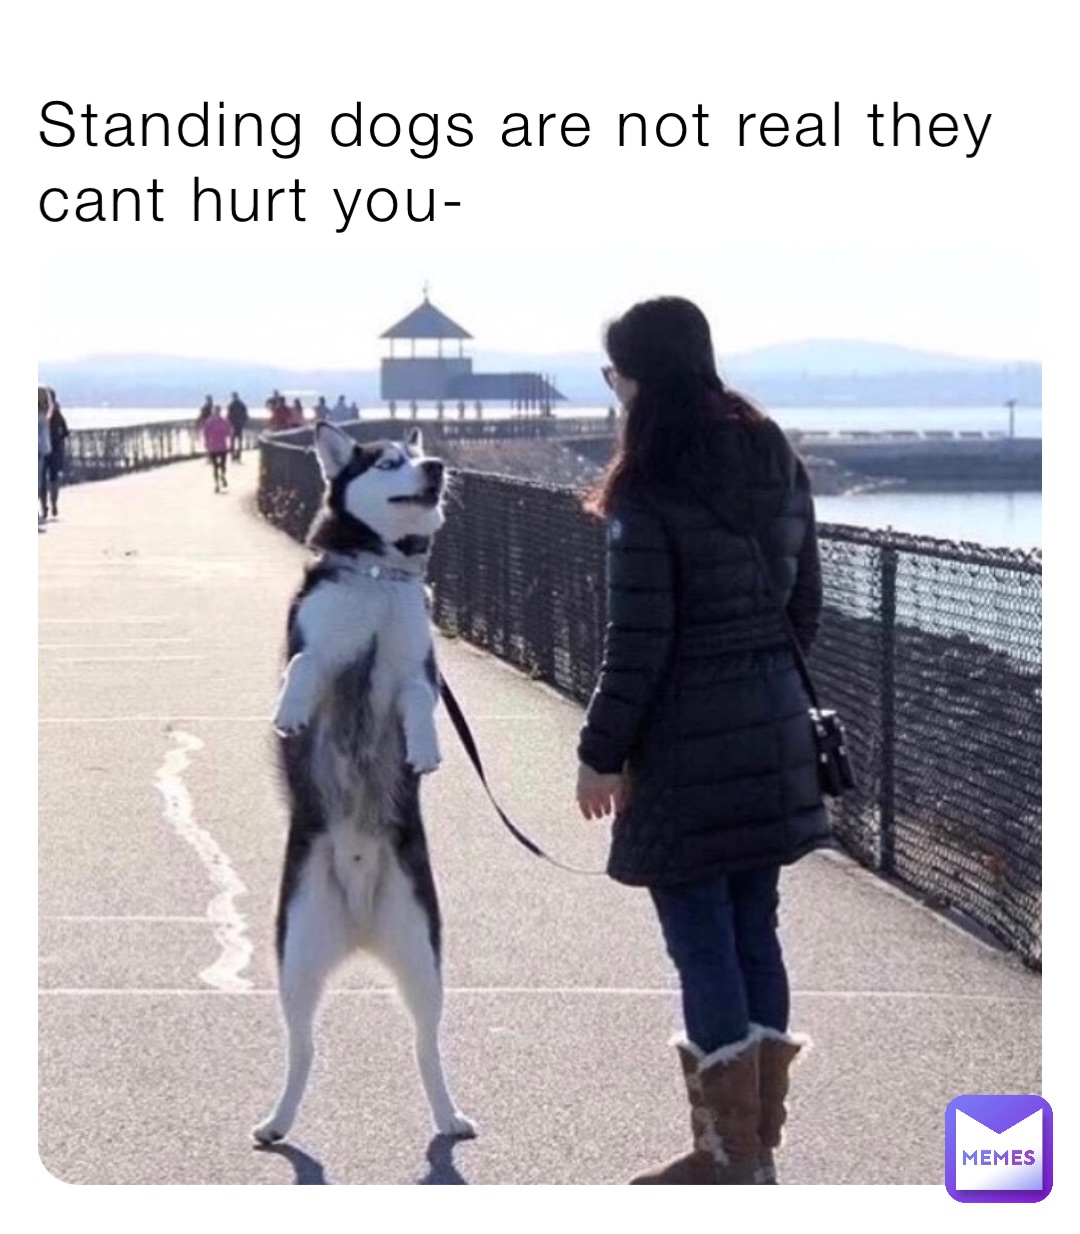 Standing dogs are not real they cant hurt you-